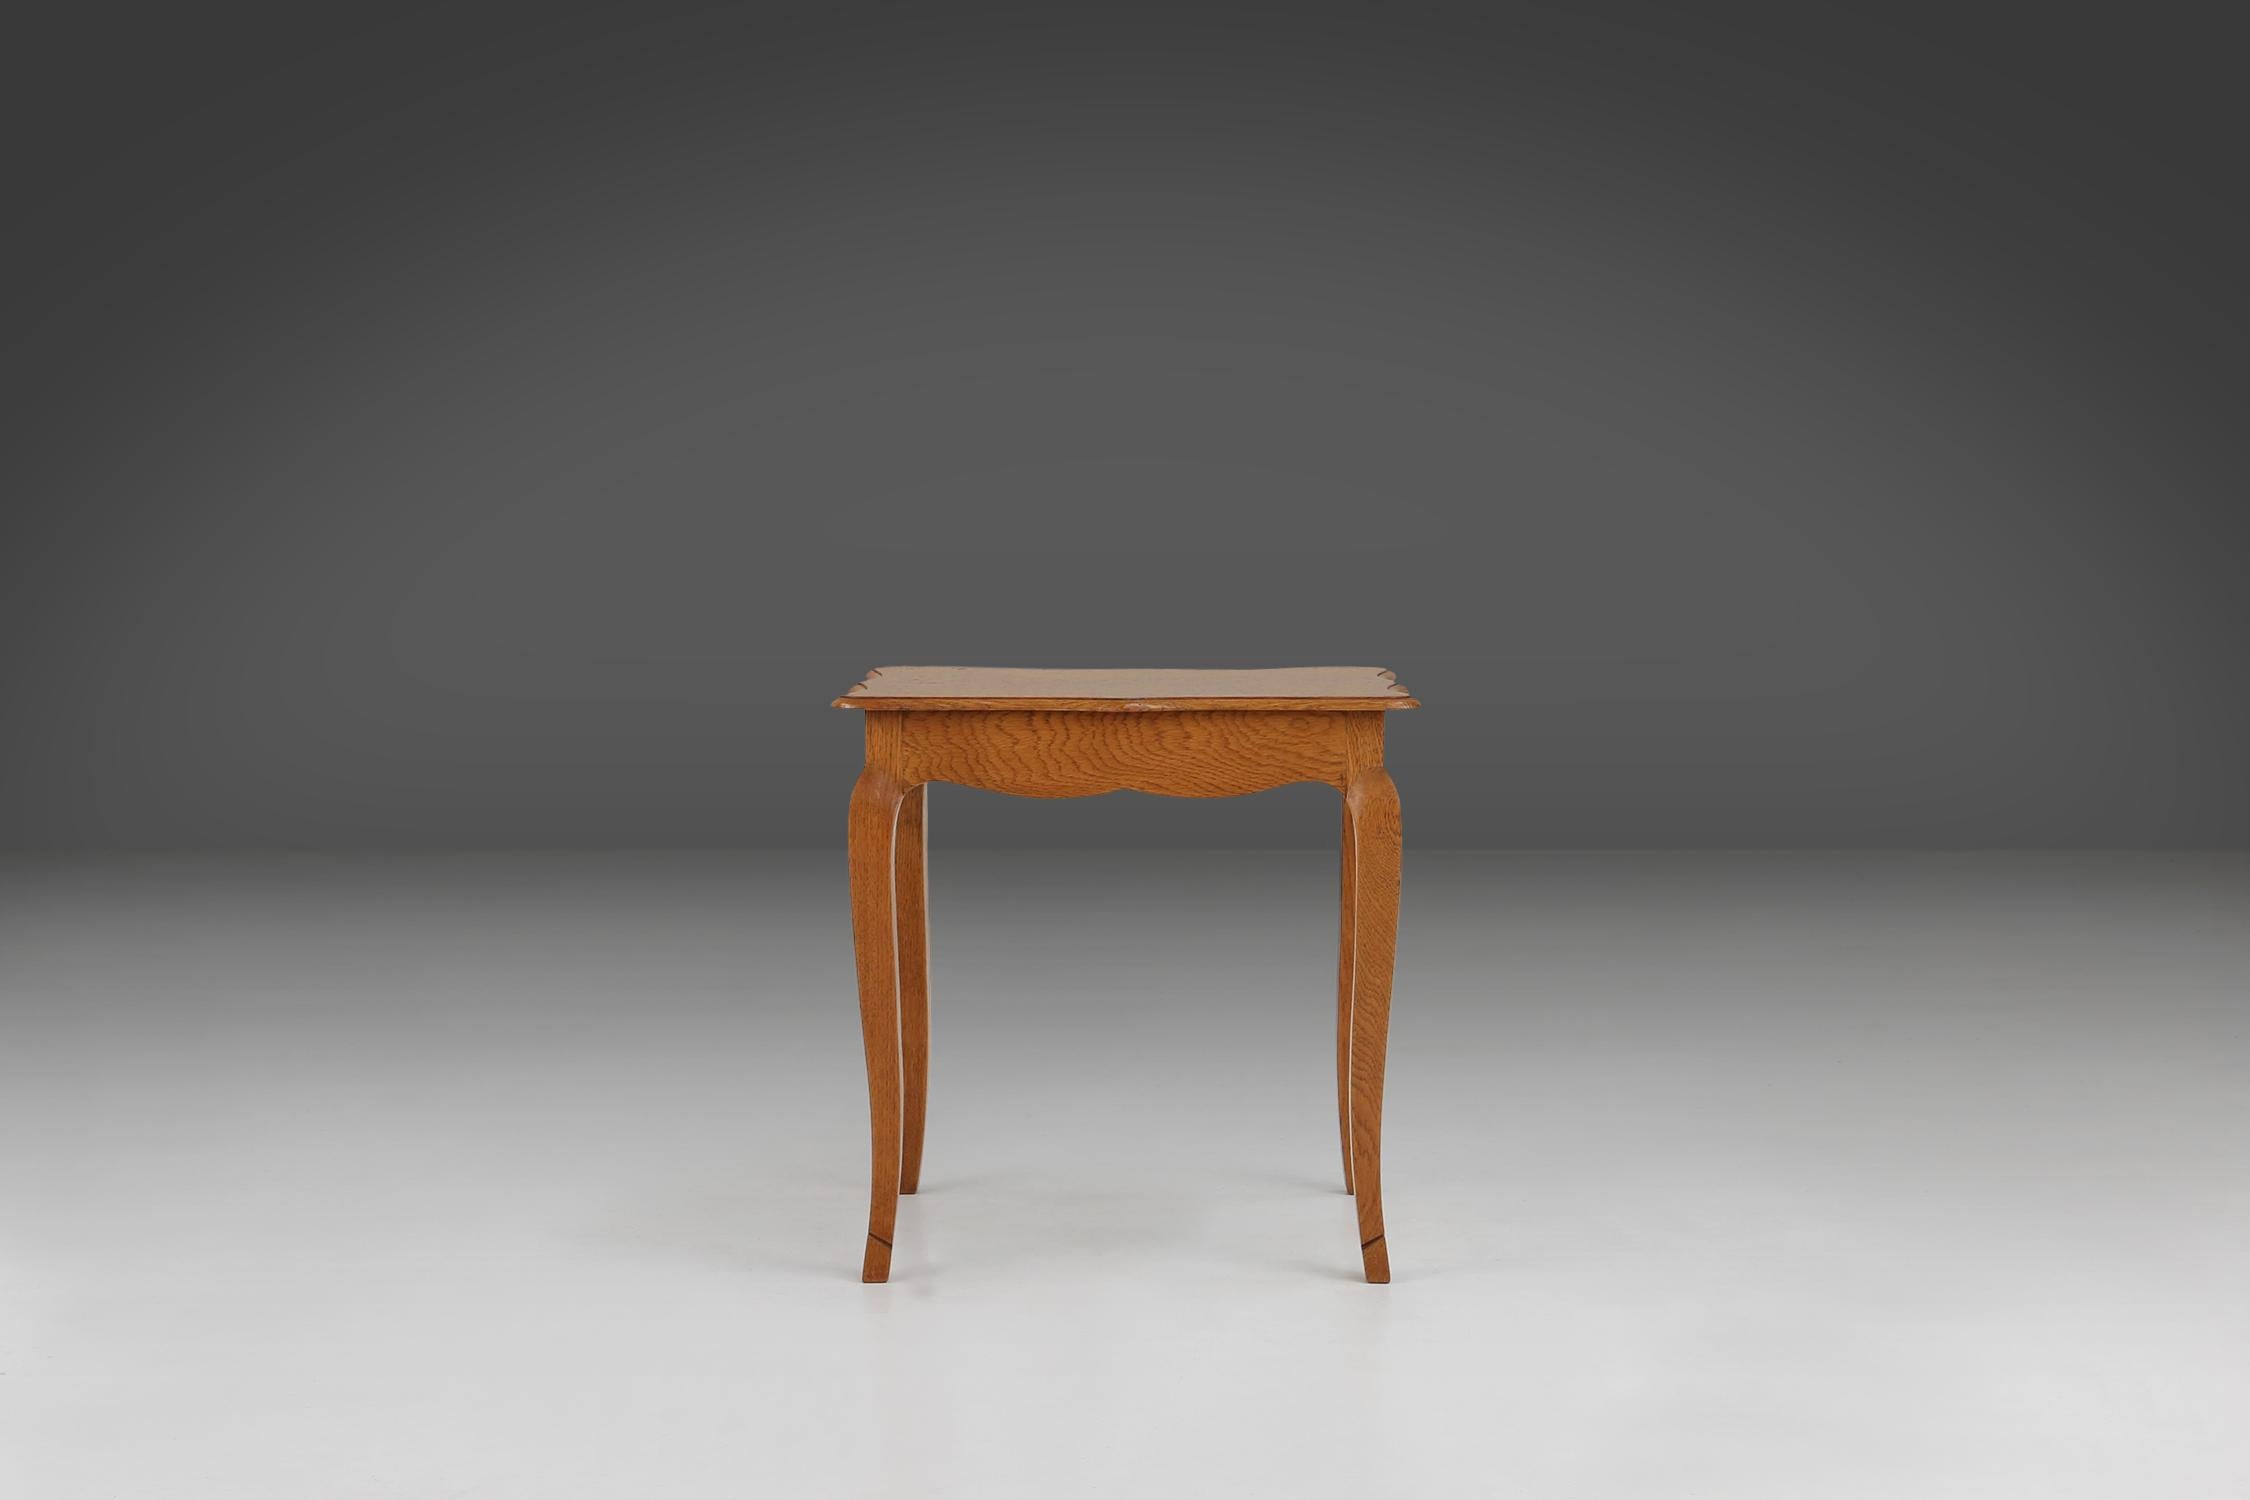 Handcrafted wooden table with its graceful lines and warm, rich finish, this furniture piece is designed to add both functionality and style to your space.

Its decorative legs and detailed carvings are evidence of craftsmanship that will last for